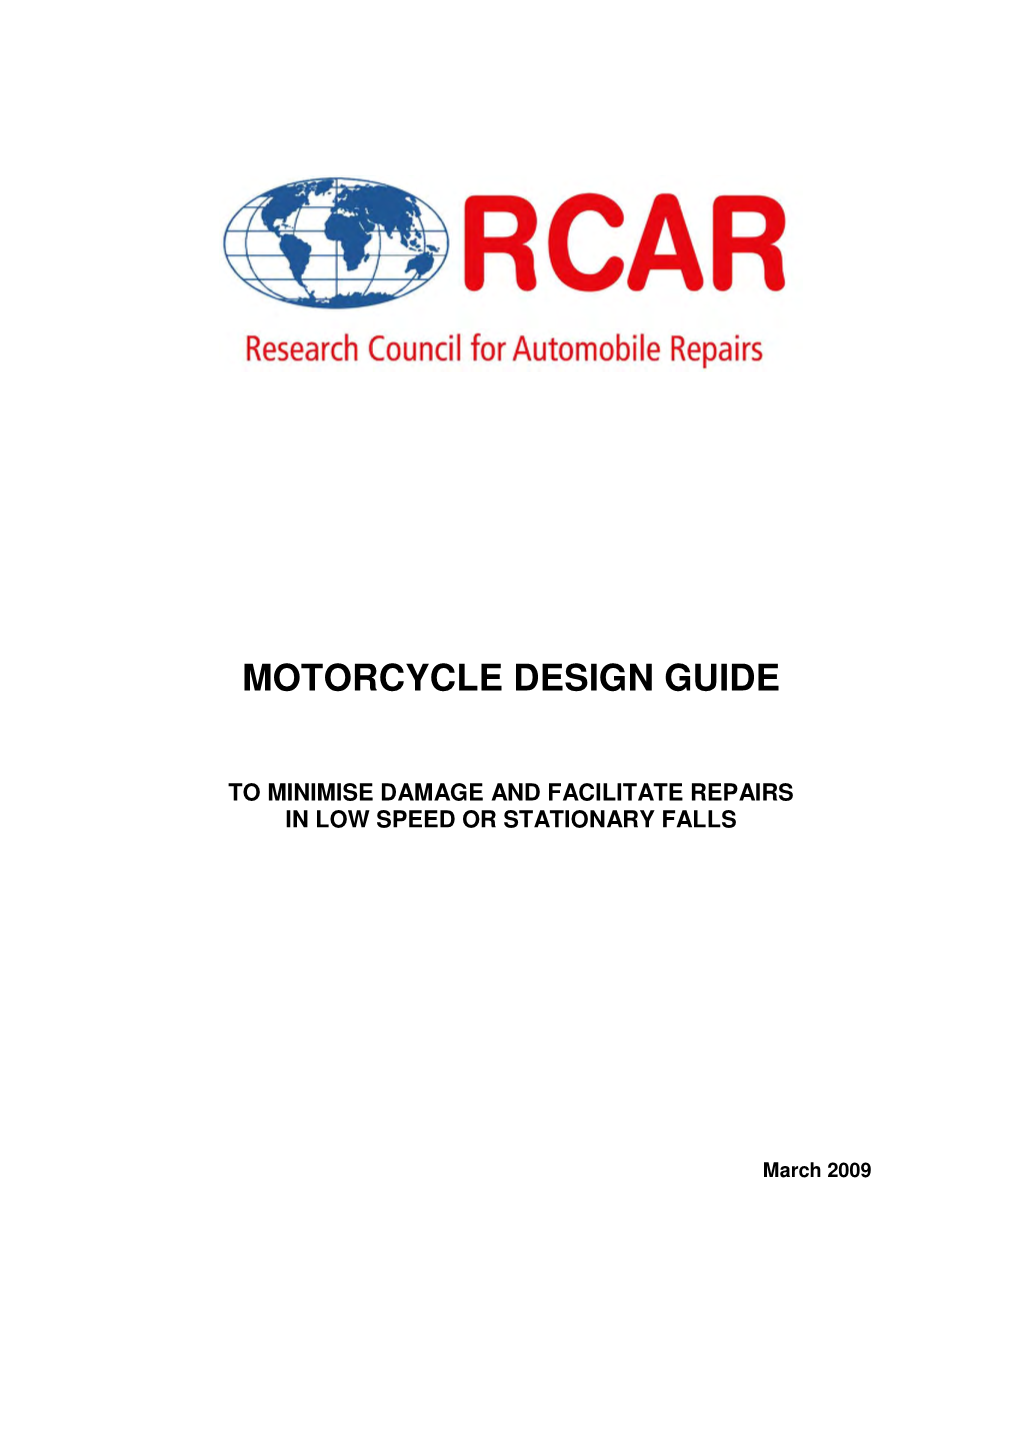 Motorcycle Design Guide